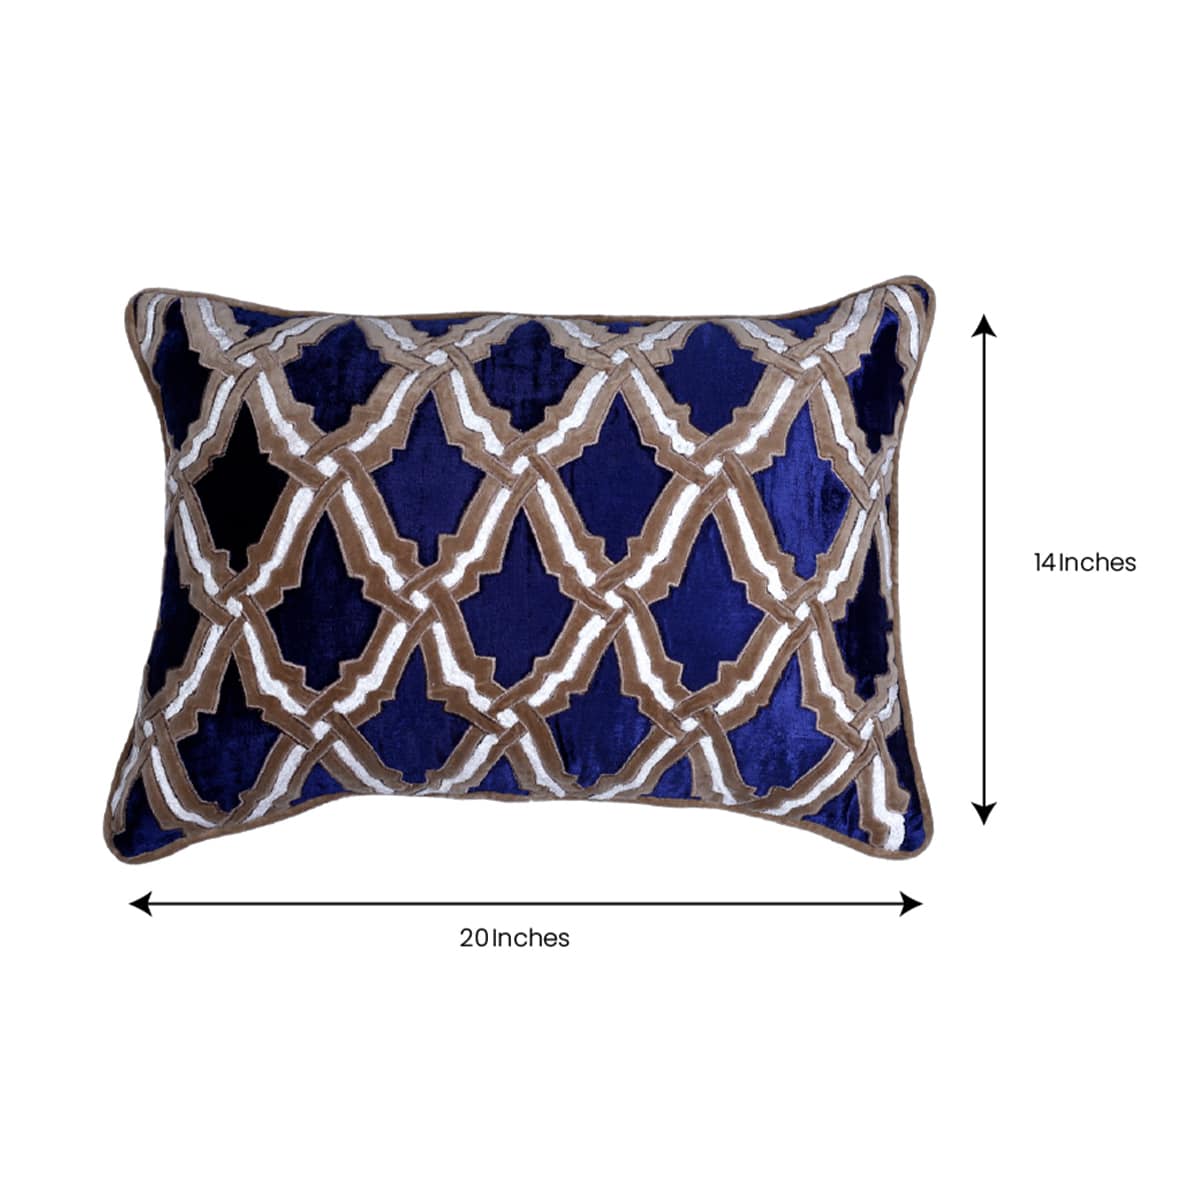 Navy Blue Throw Pillow Covers - Set of 2 and 4, 14 x 20 inches - Decozen